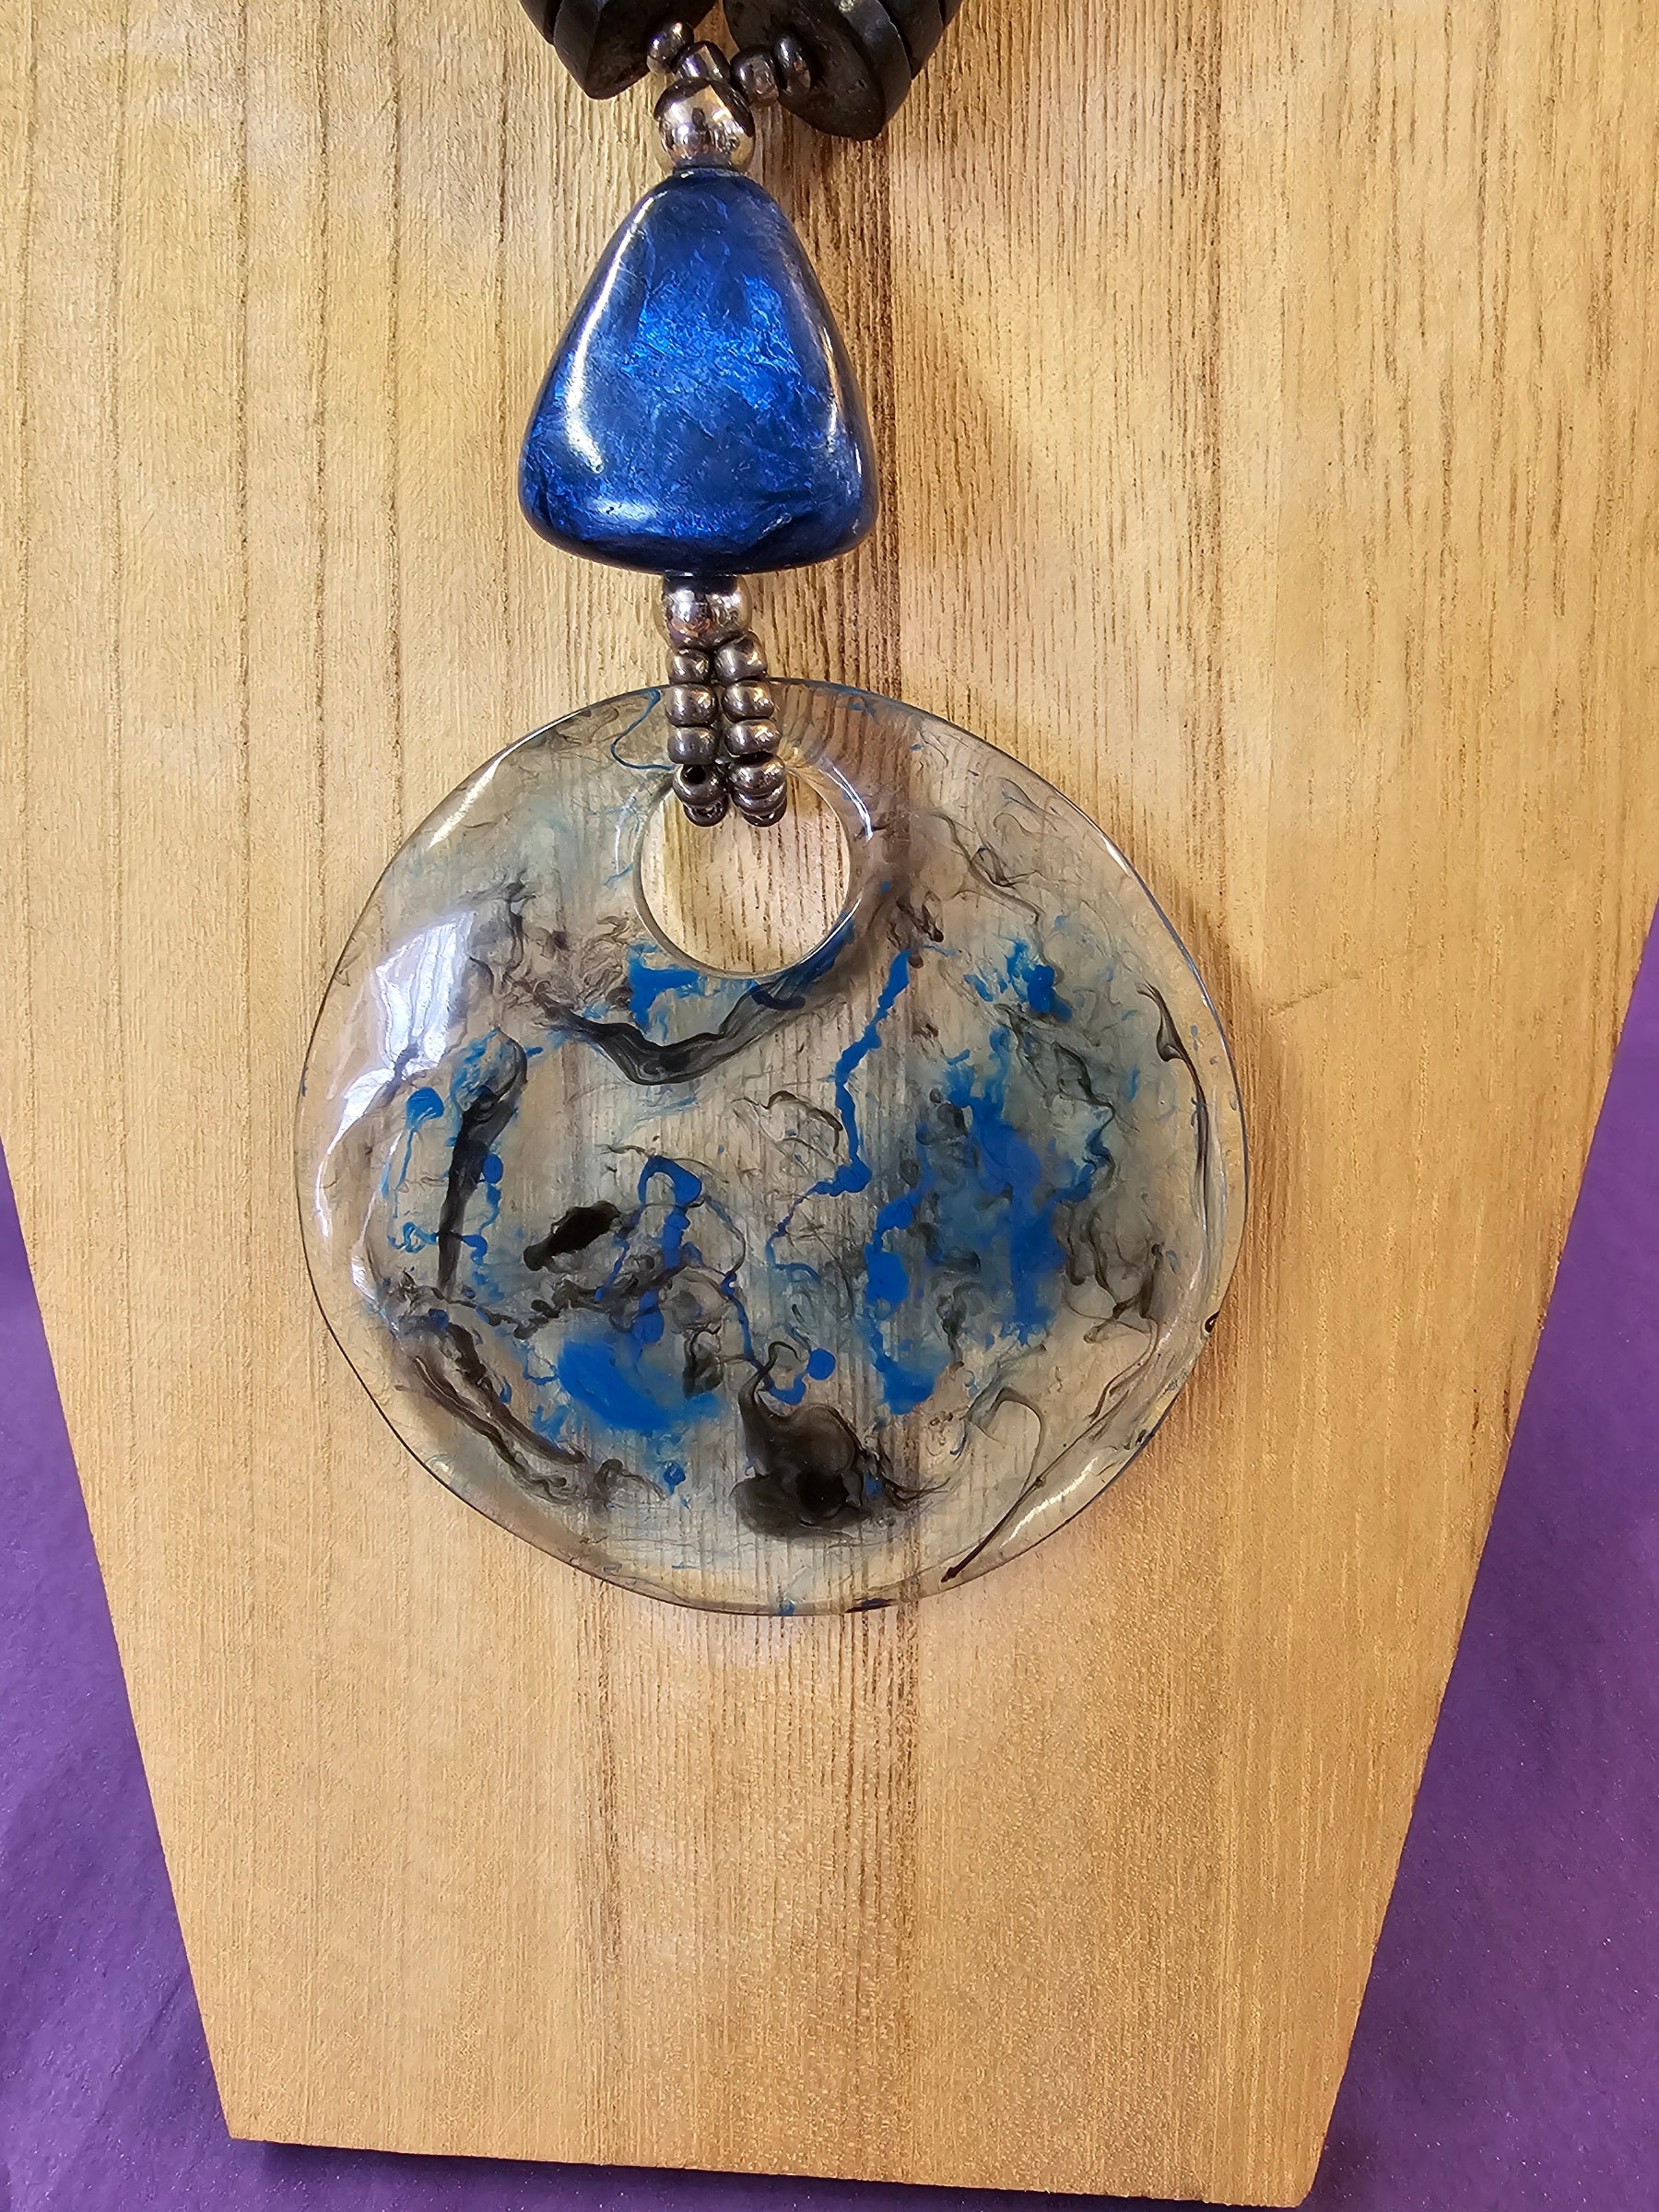 Beautiful Resin Black and Blue  Necklace